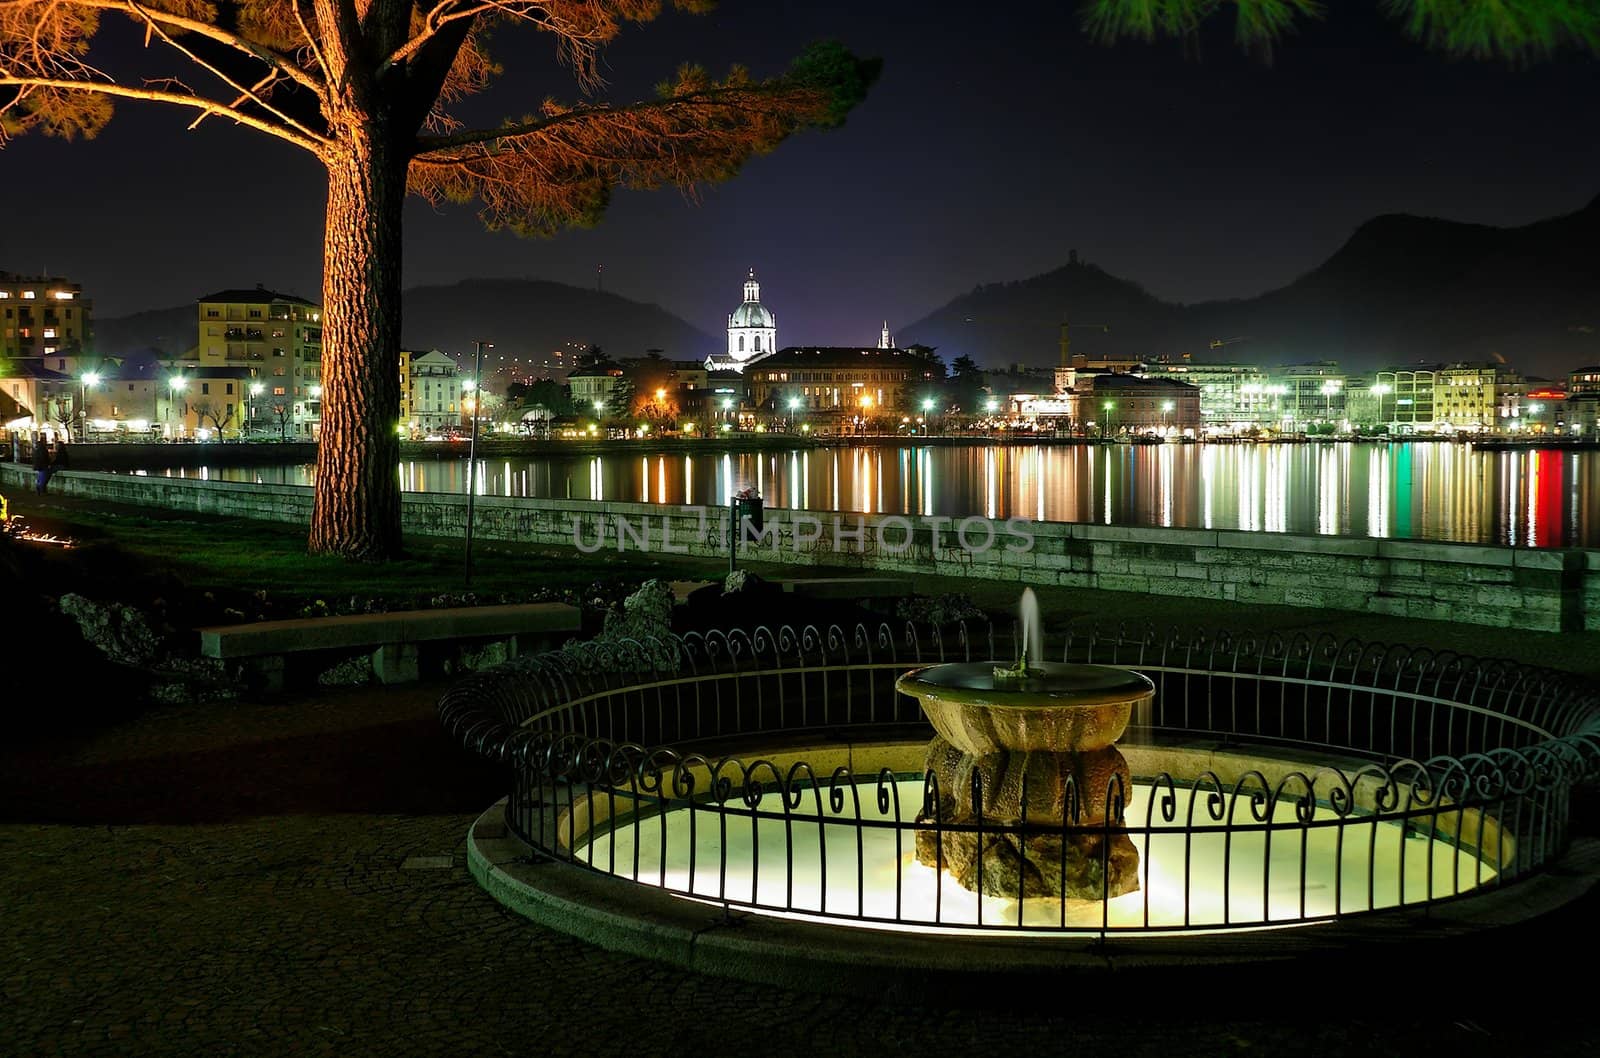 Lakeside city at nigh with illuminated fountain in foreground